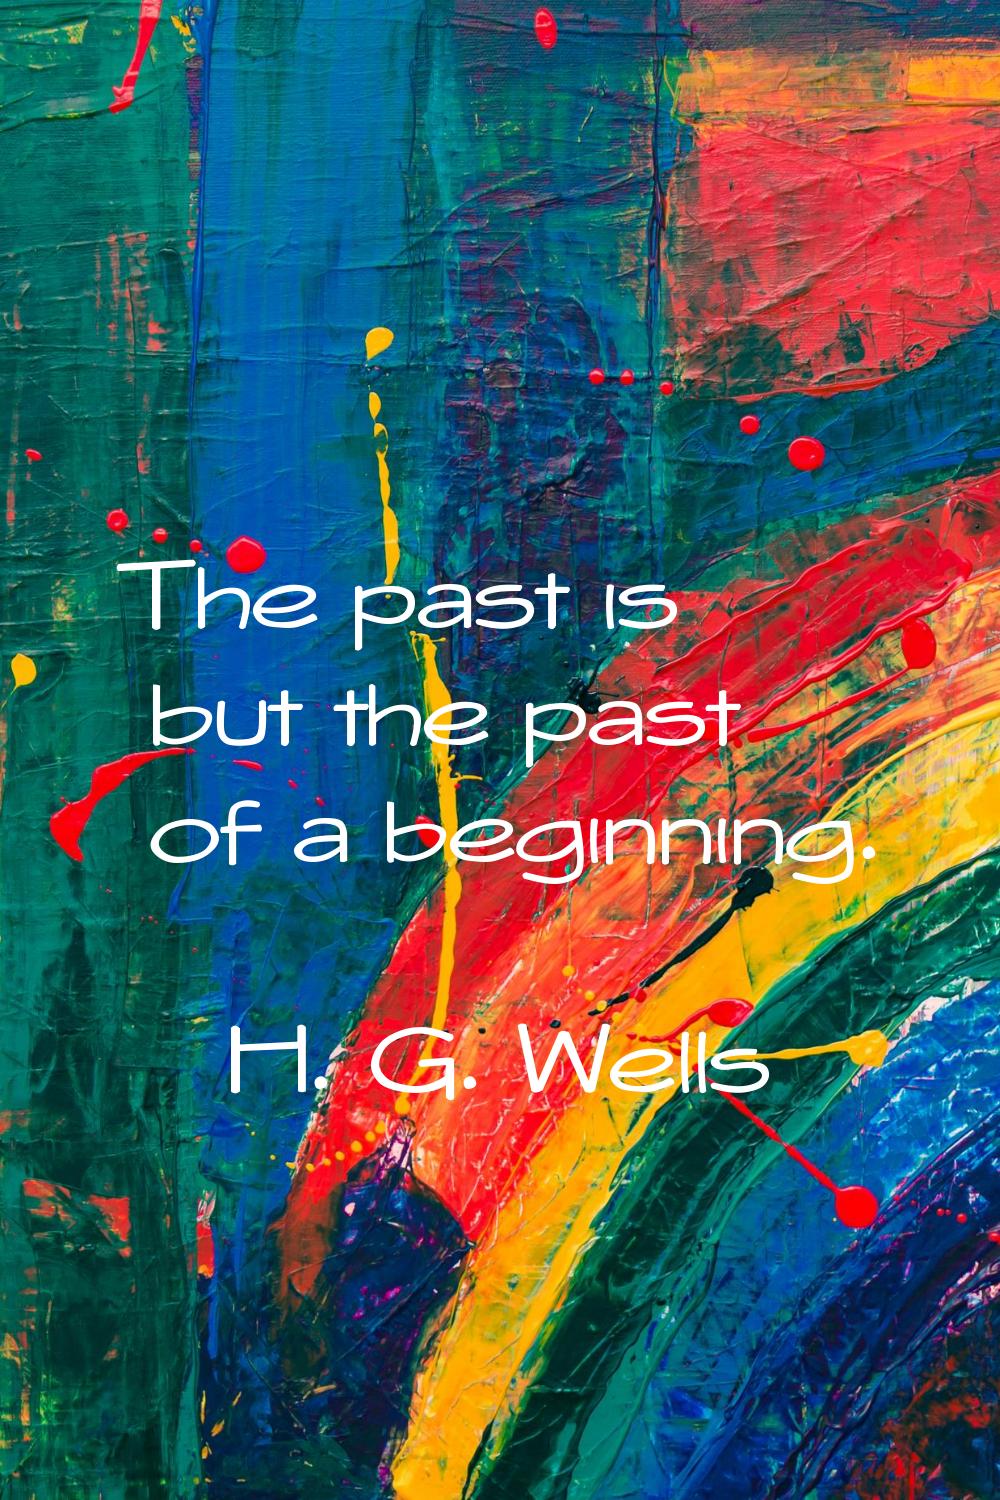 The past is but the past of a beginning.